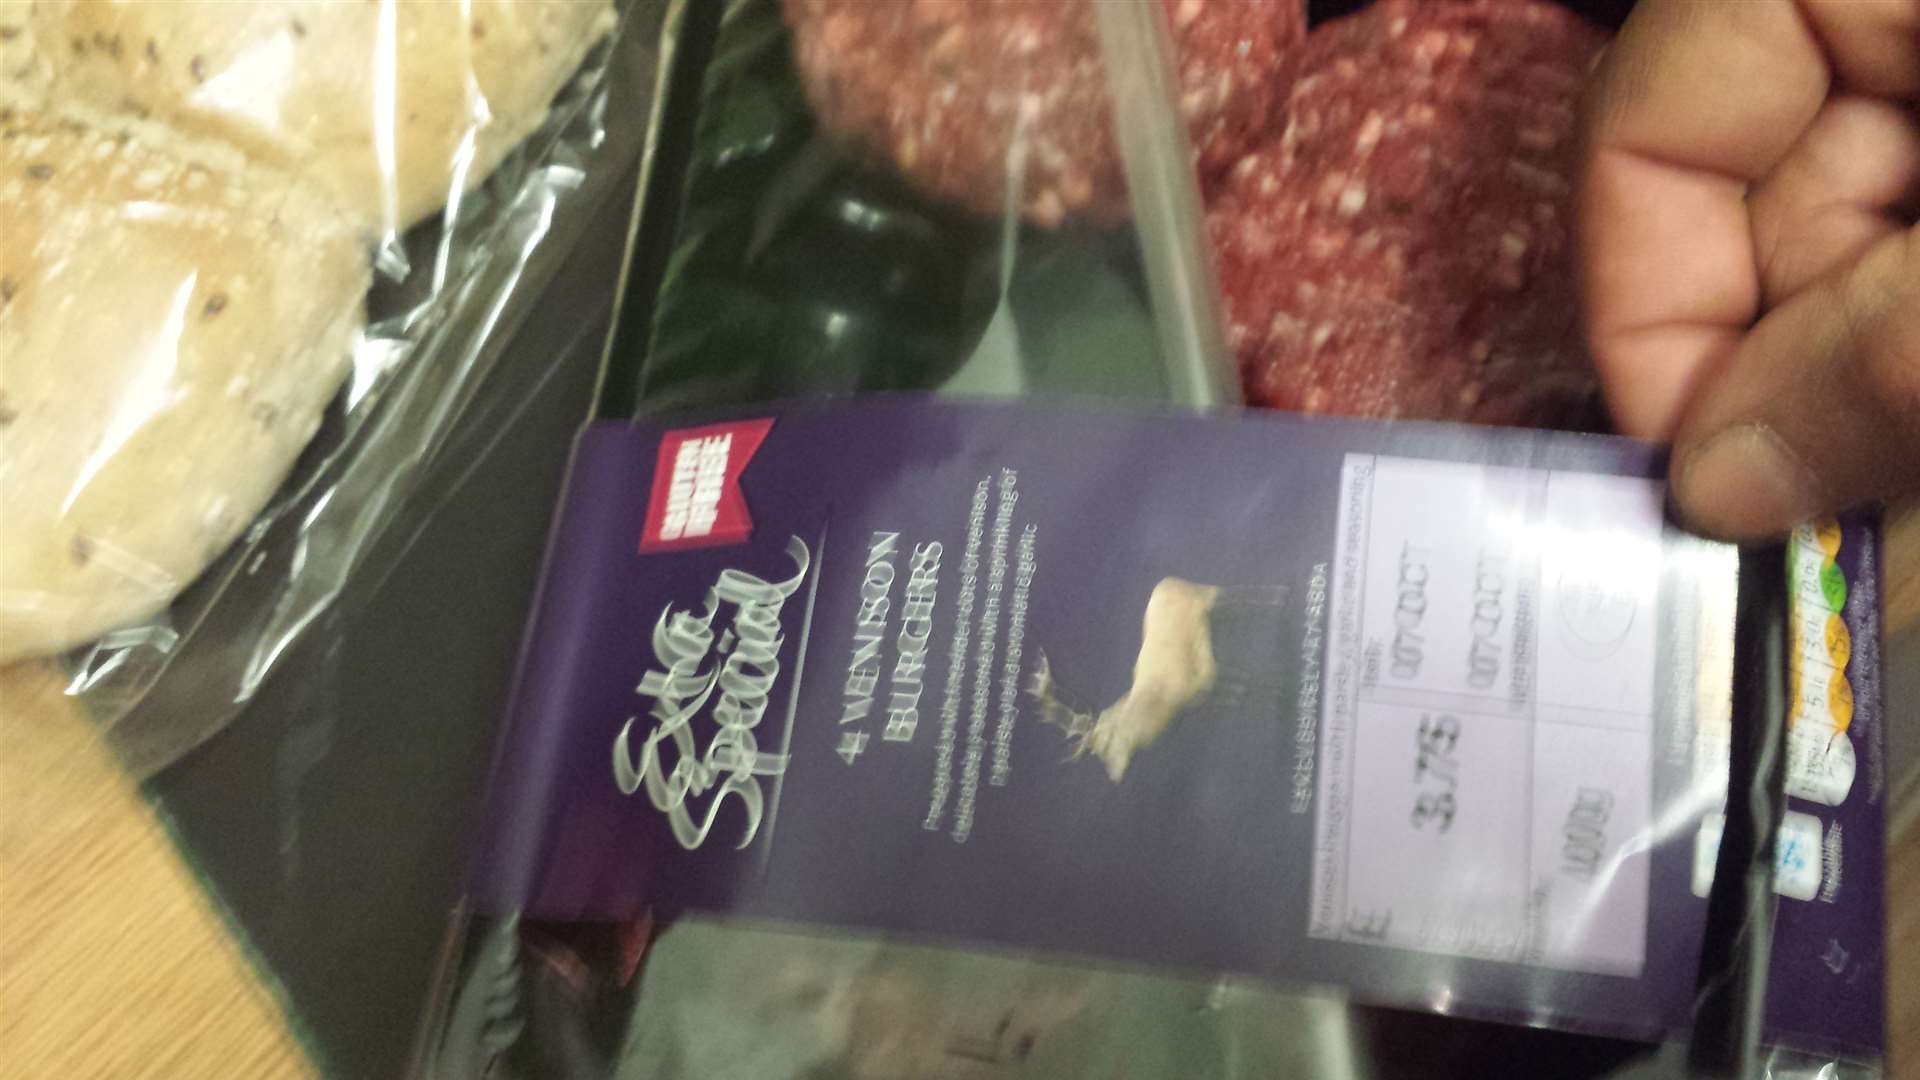 The 'extra special' banner on Asda packaging hid the mould on its venison burgers